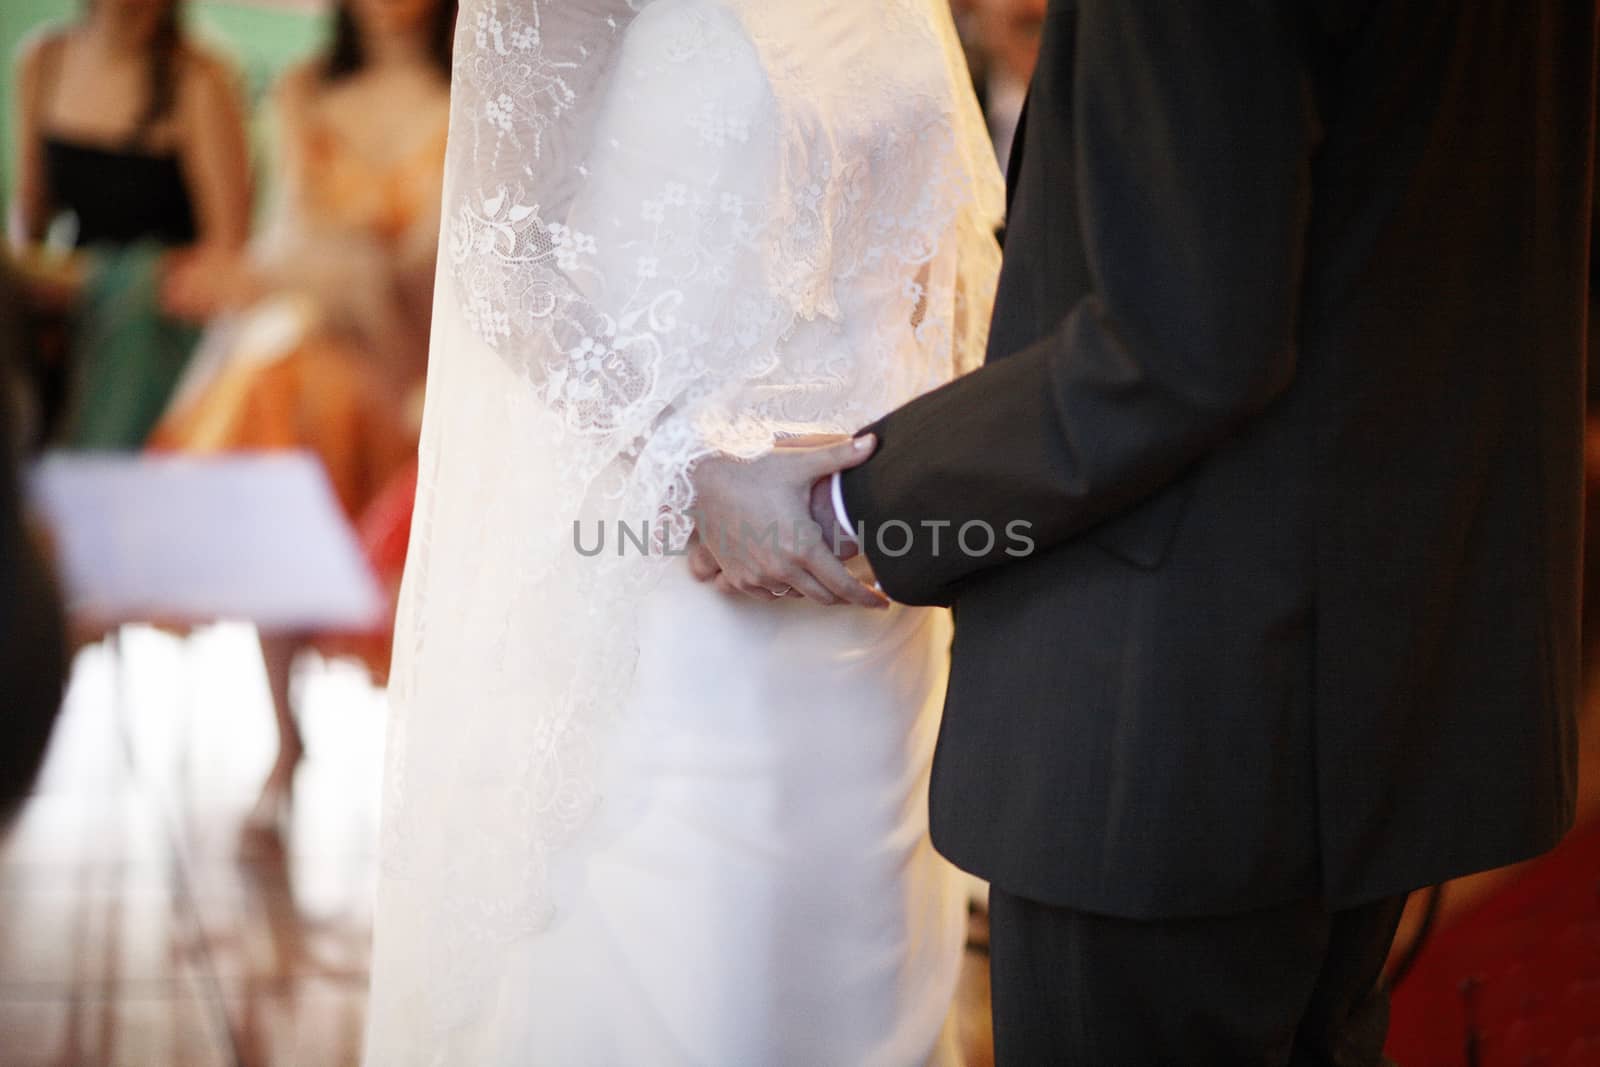 Color artistic digital photo of bridegroom in dark suit and white shirt with cufflinks in church religious wedding marriage ceremony holding hands with the bride in white wedding bridal dress. Shallow depth of with background out of focus. 